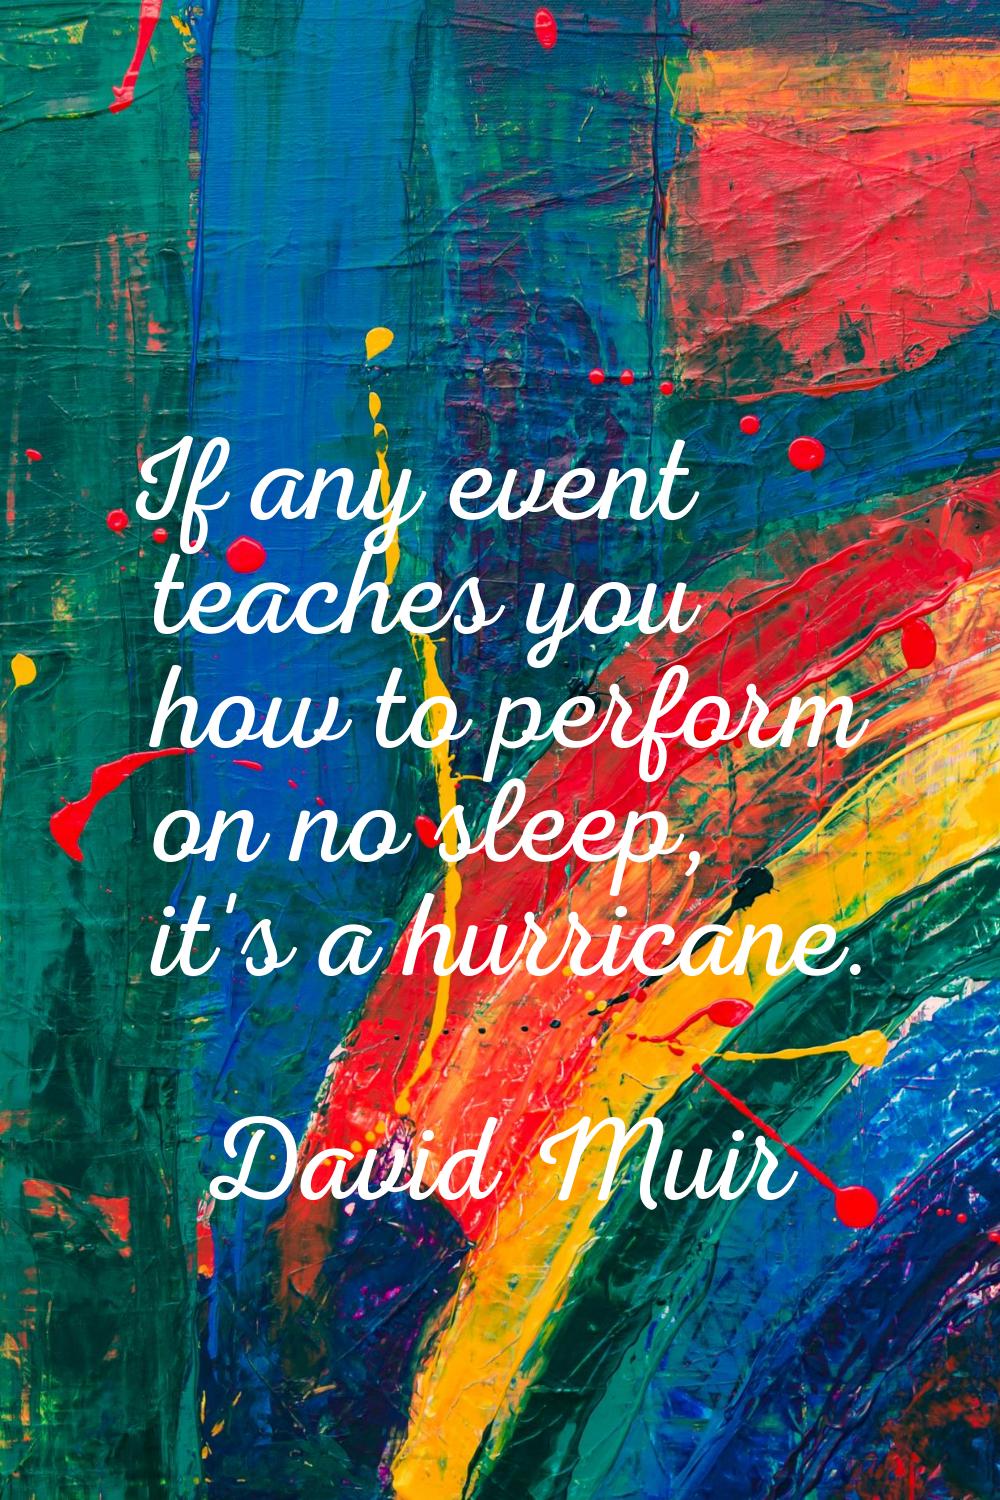 If any event teaches you how to perform on no sleep, it's a hurricane.